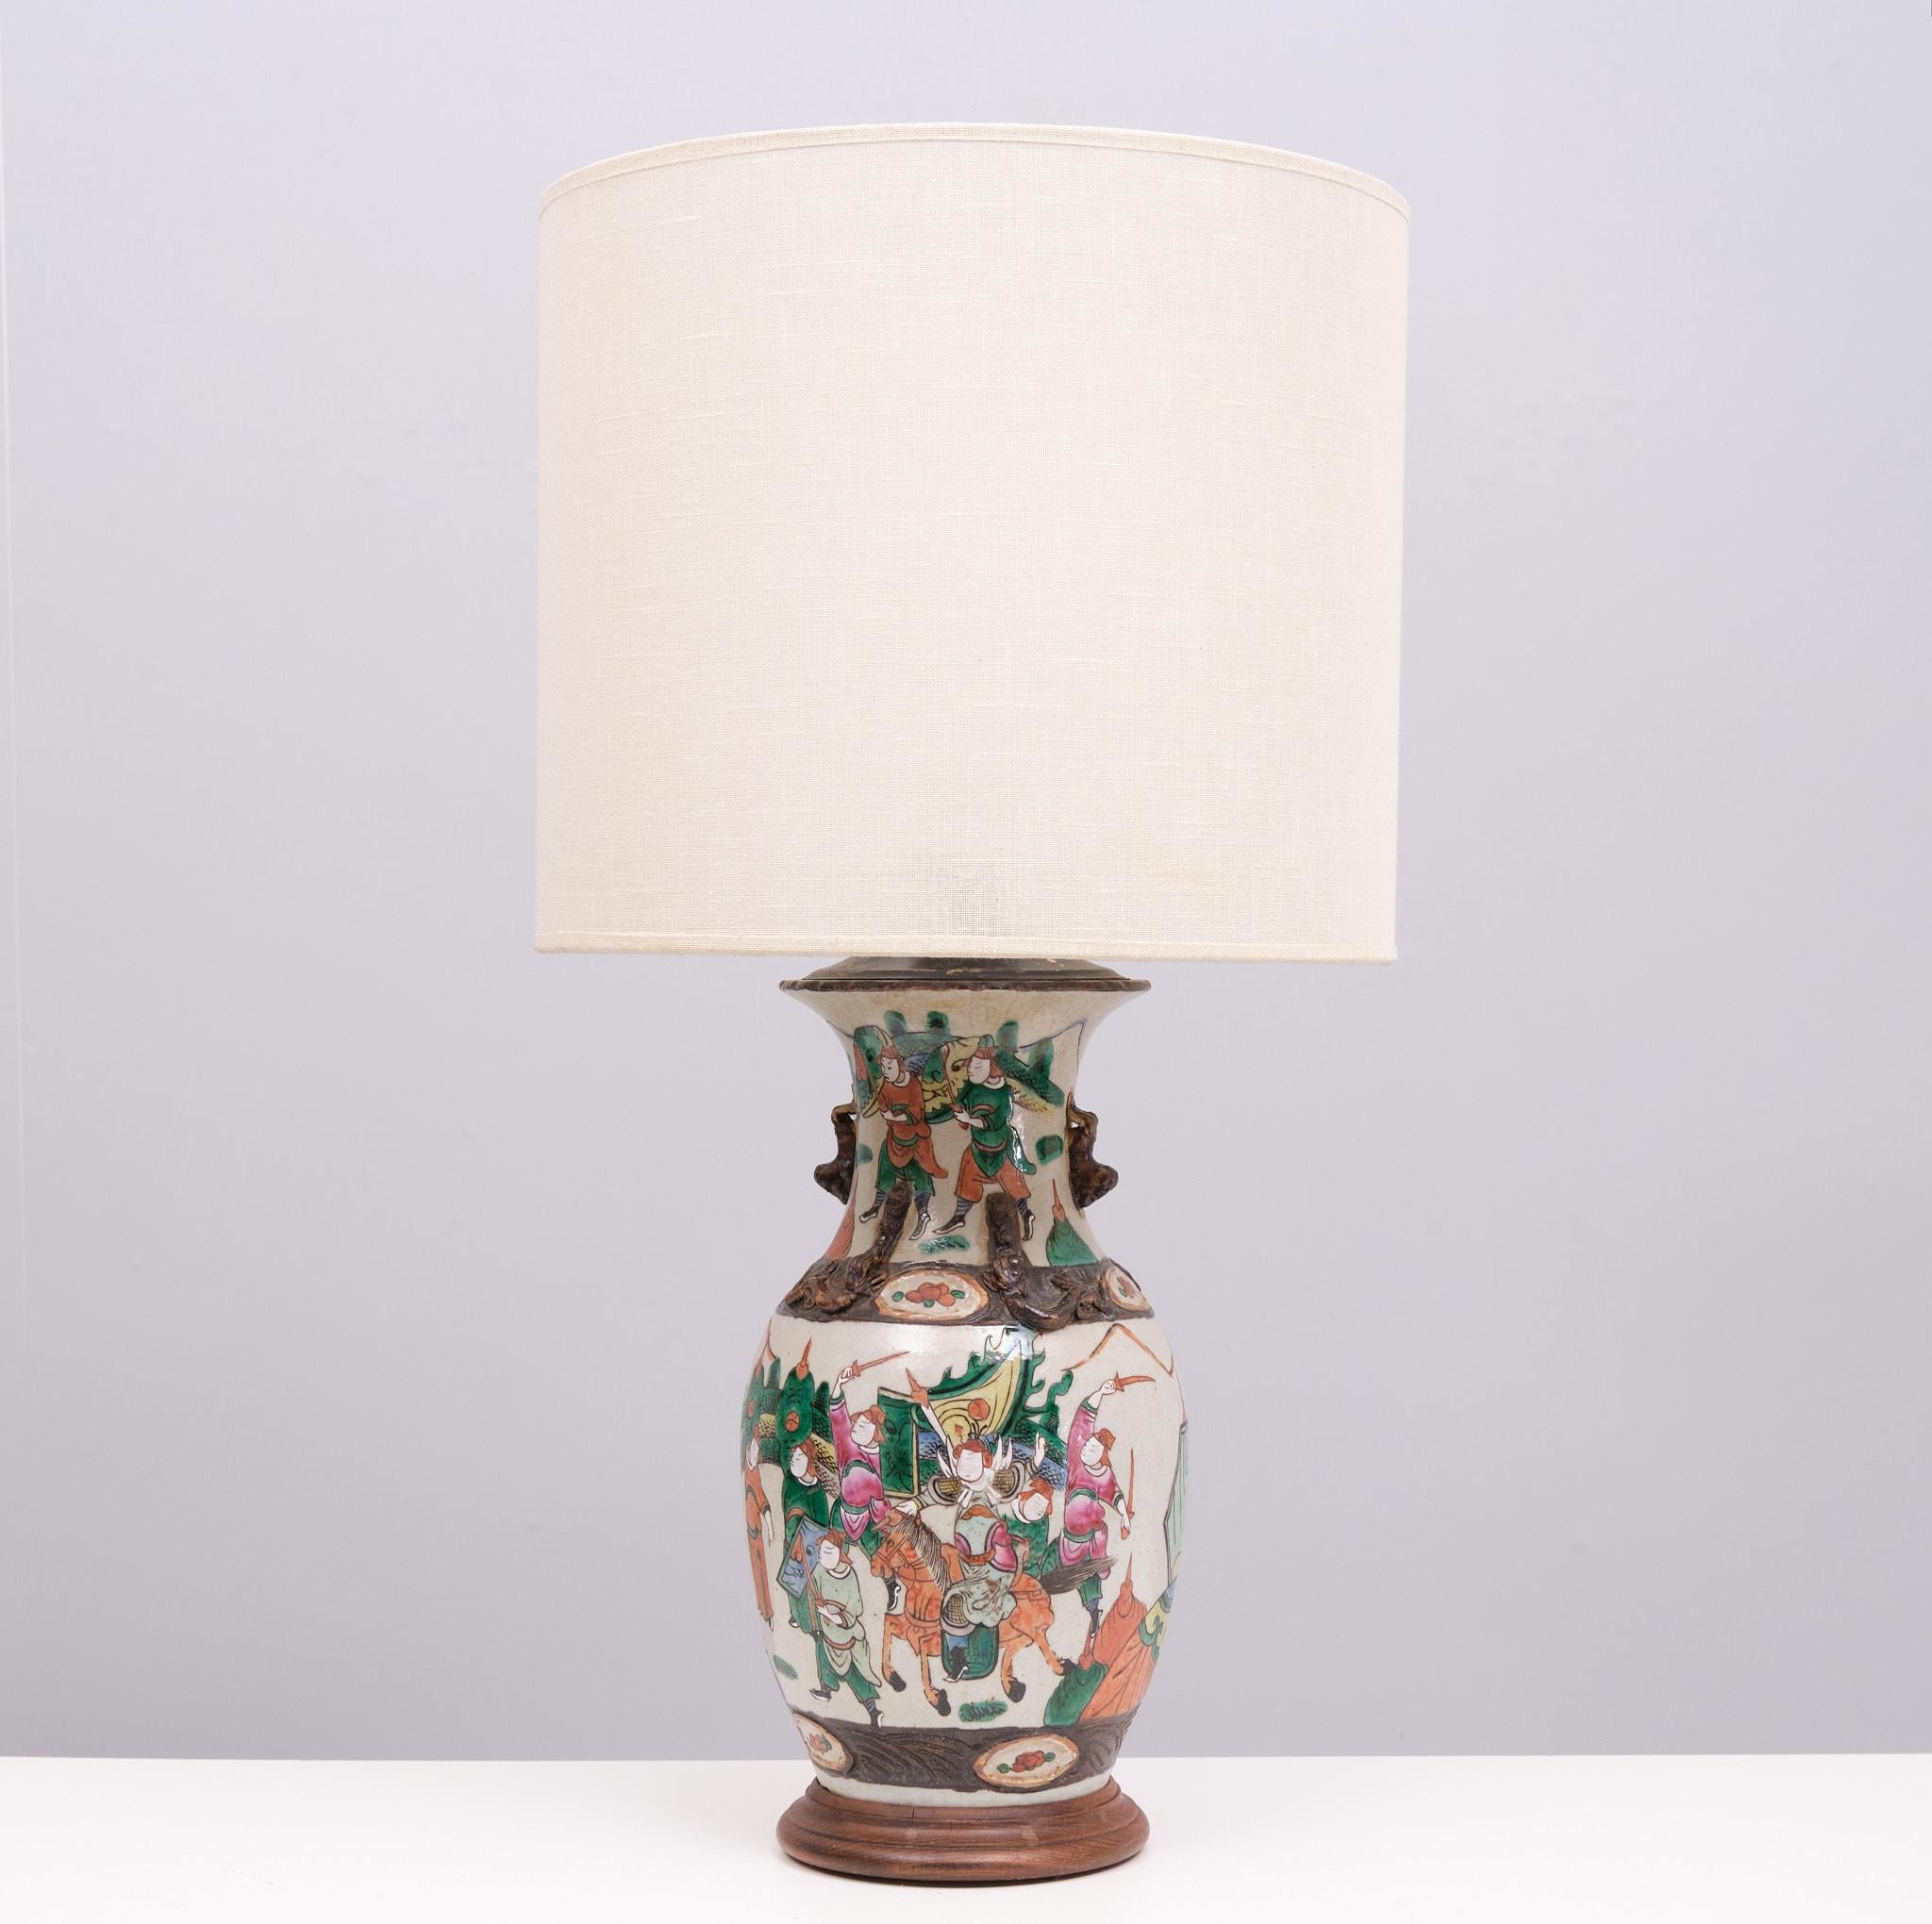 Earthenware Nanking Earth-ware  table lamp  1890s China  For Sale